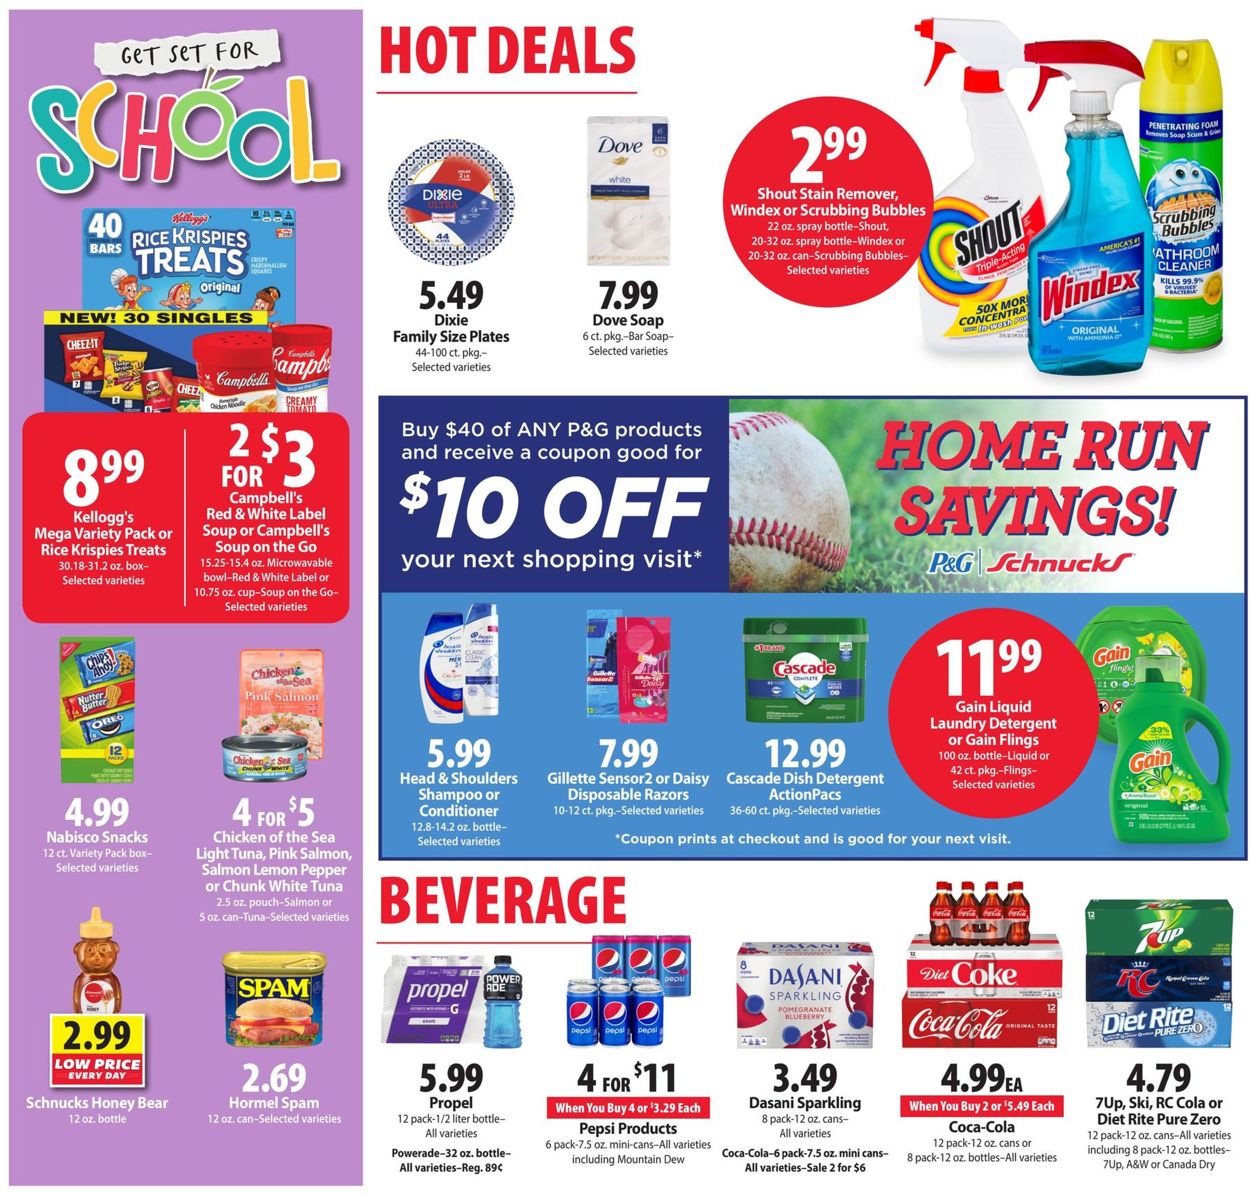 Schnucks Current weekly ad 08/14 - 08/20/2019 [6] - frequent-ads.com